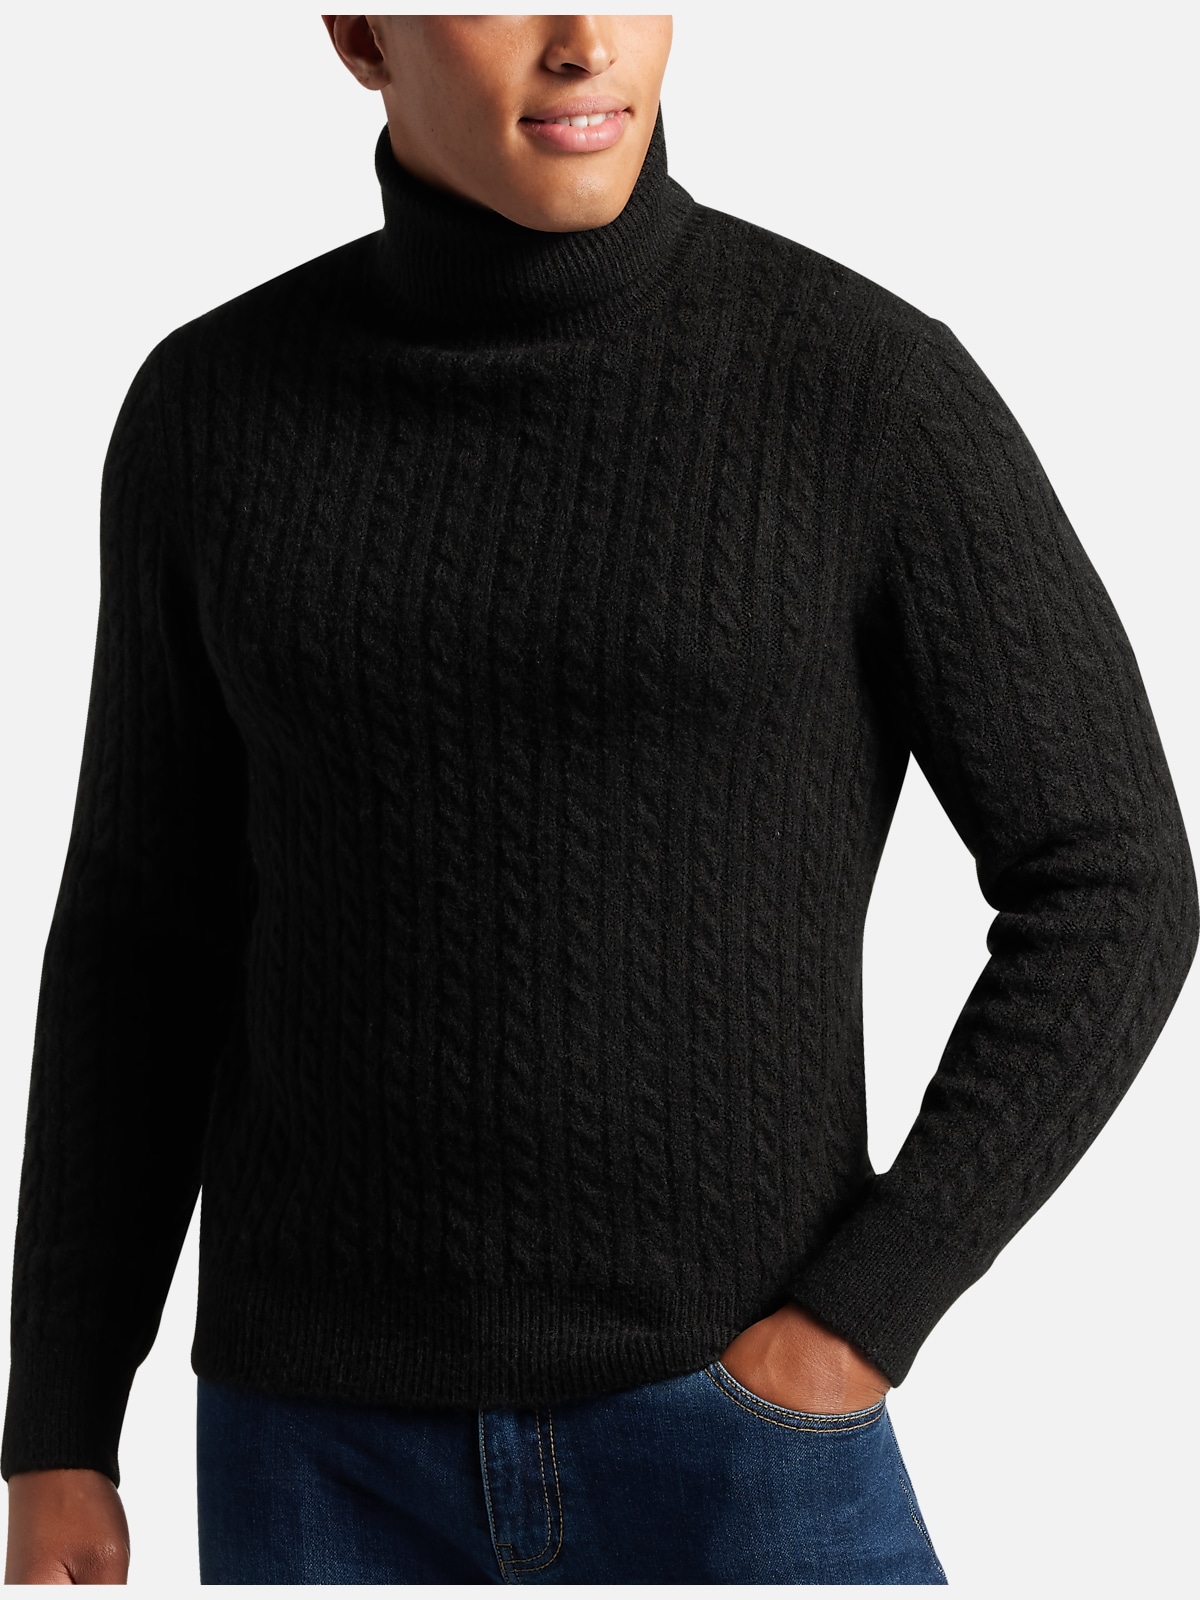 Paisley & Gray Slim Fit Cable Knit Turtleneck Sweater | New Arrivals ...